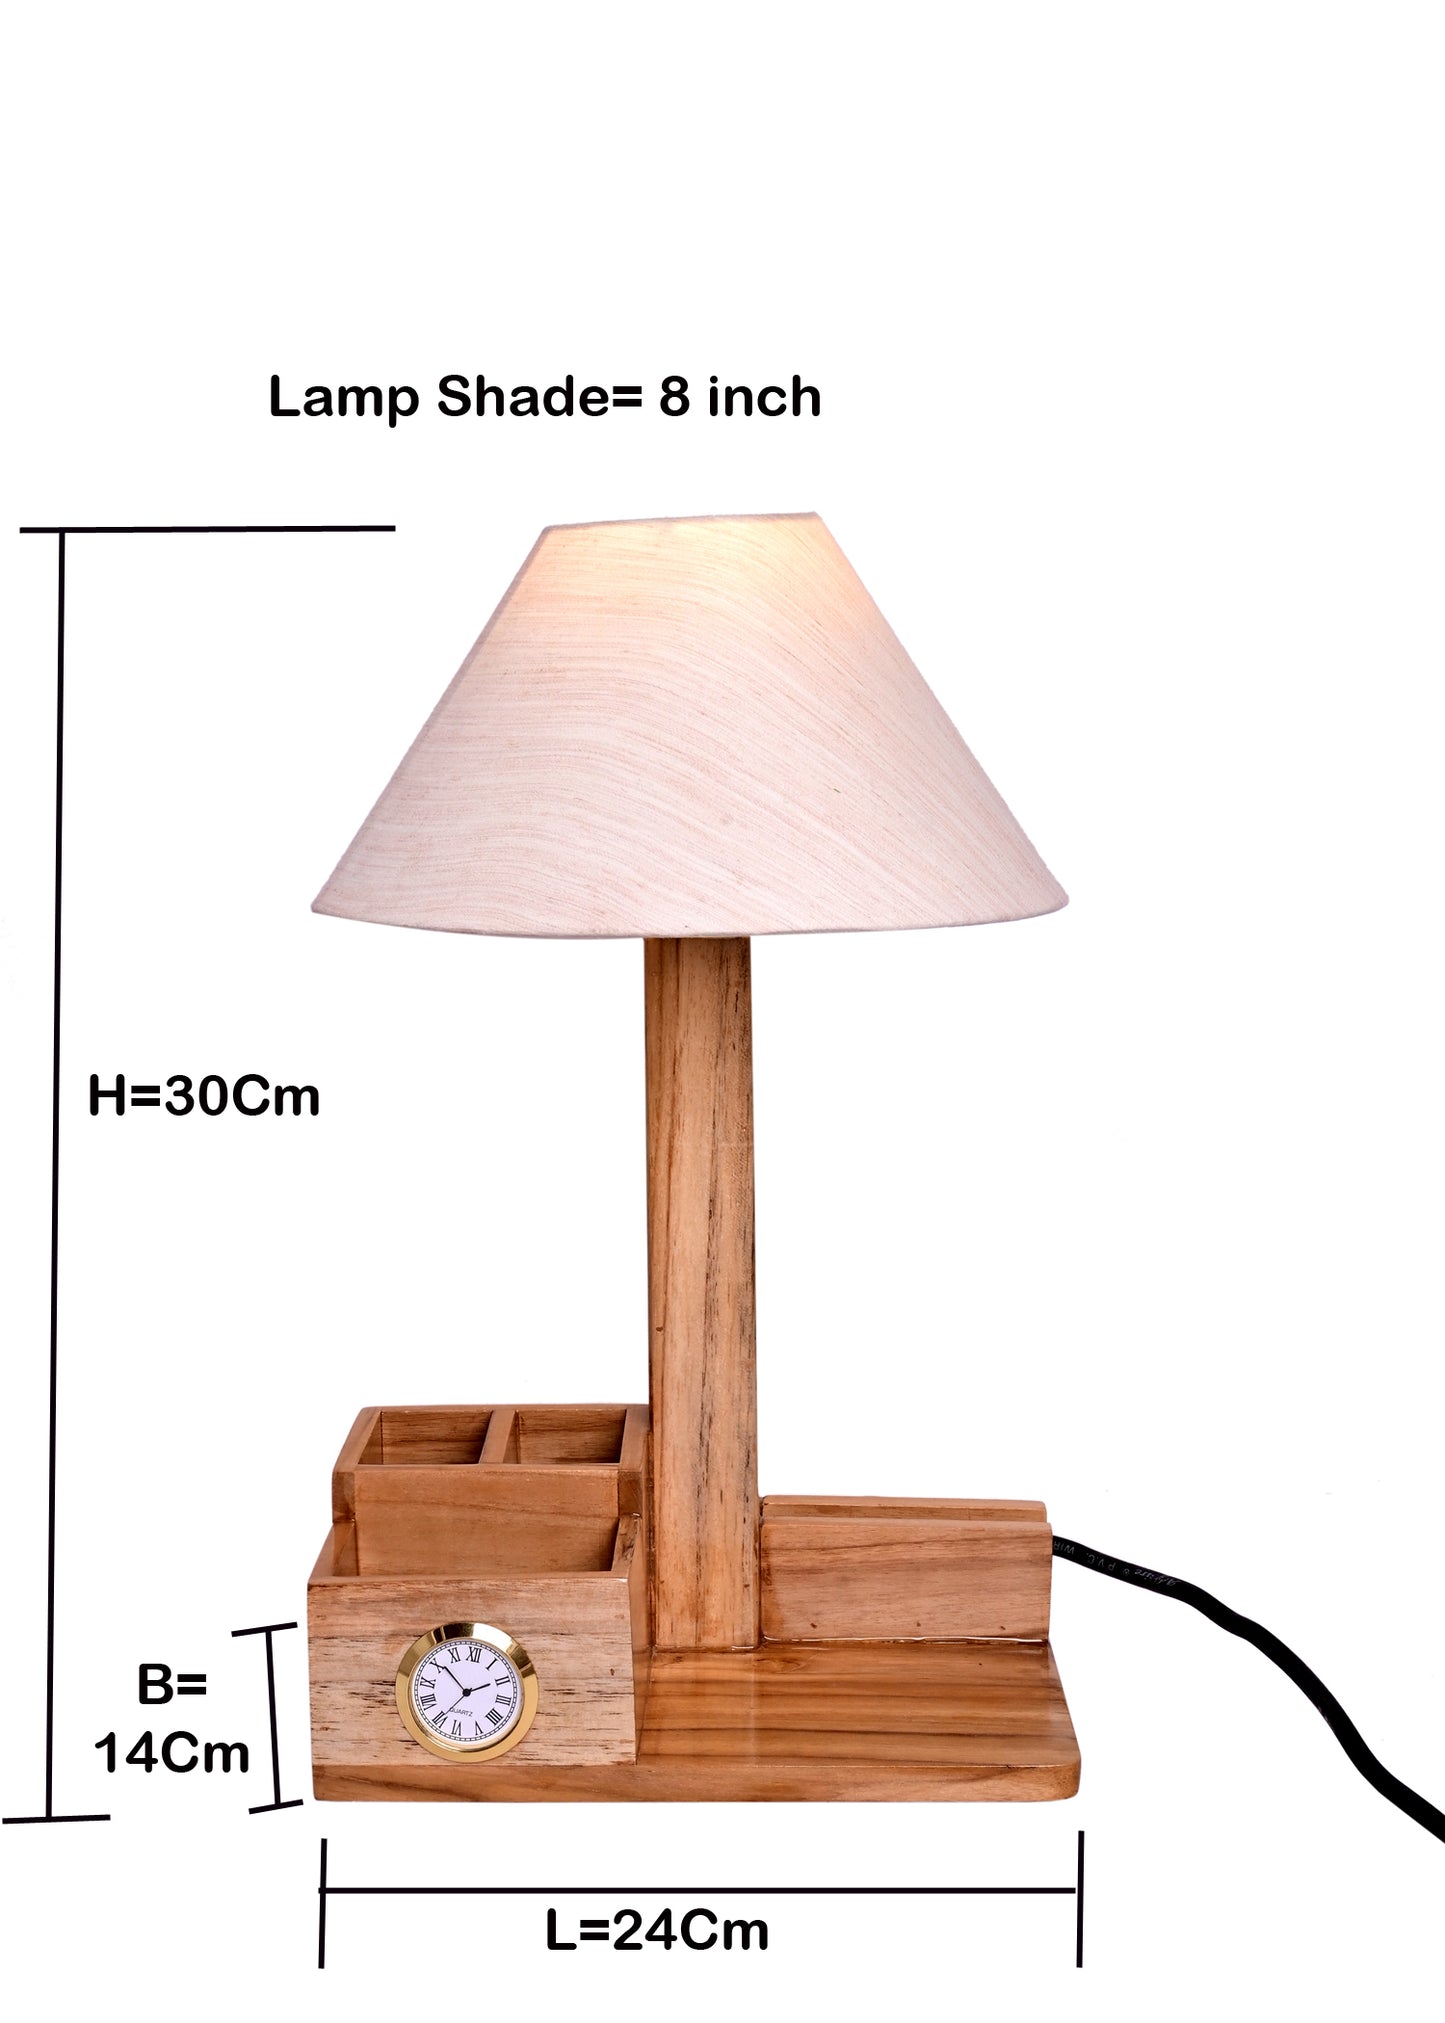 The Weaver's Nest Teak Wood Table Lamp with Clock and Storage for Home, Living Room, Bedroom, Study Room, Bedside Tables